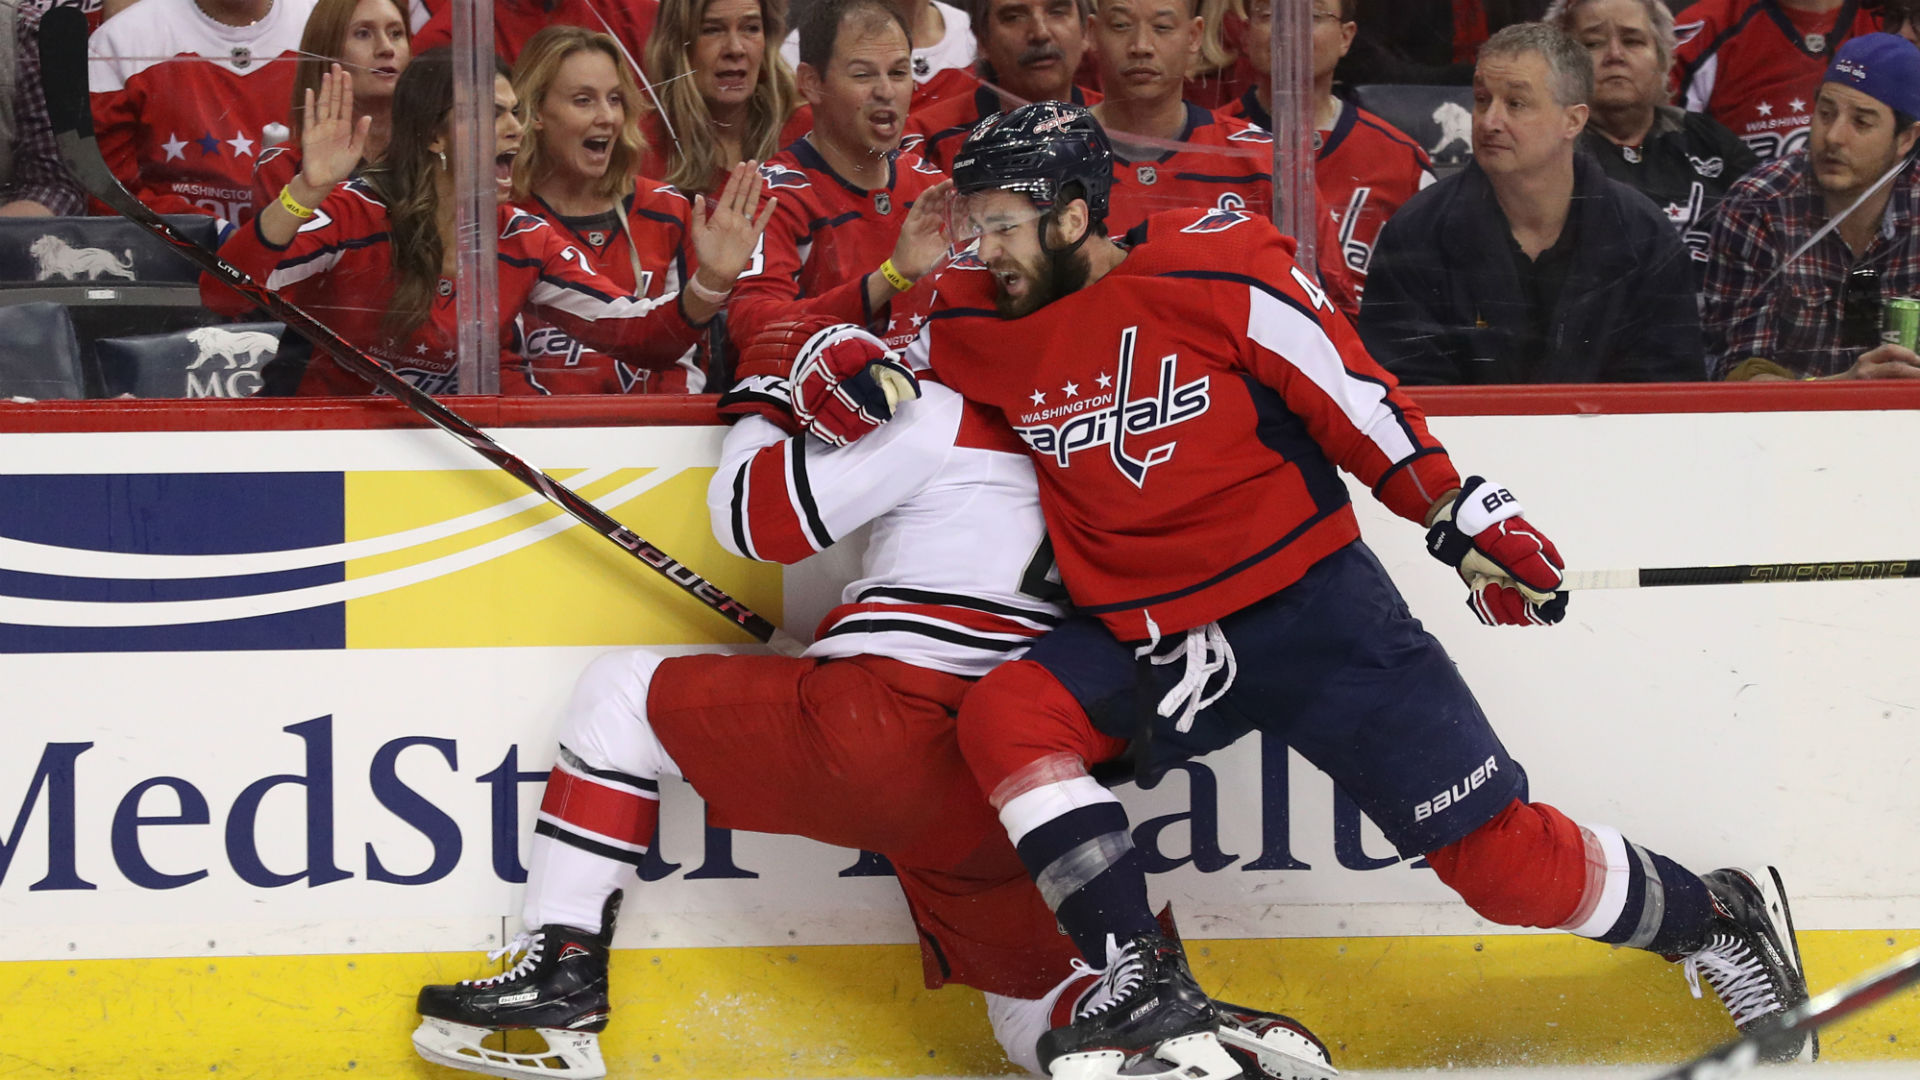 NHL playoffs 2019: Tom Wilson delivers questionable hit in Capitals' Game 5 blowout win